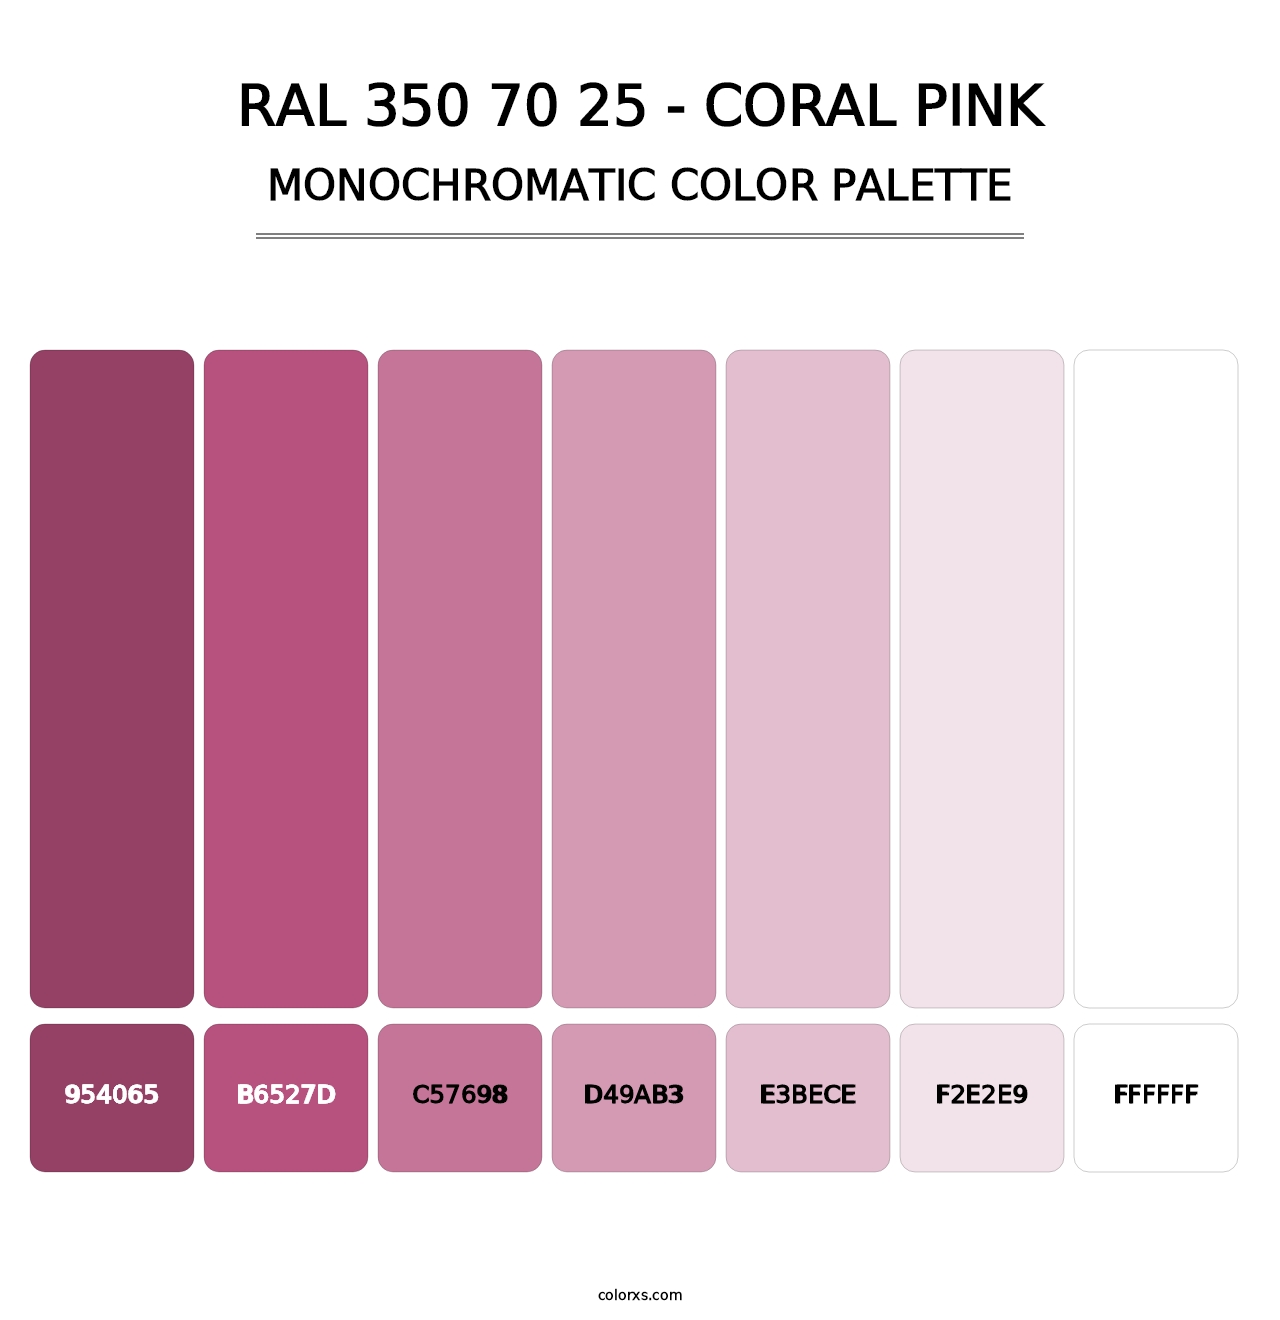 RAL 350 70 25 - Coral Pink - Monochromatic Color Palette